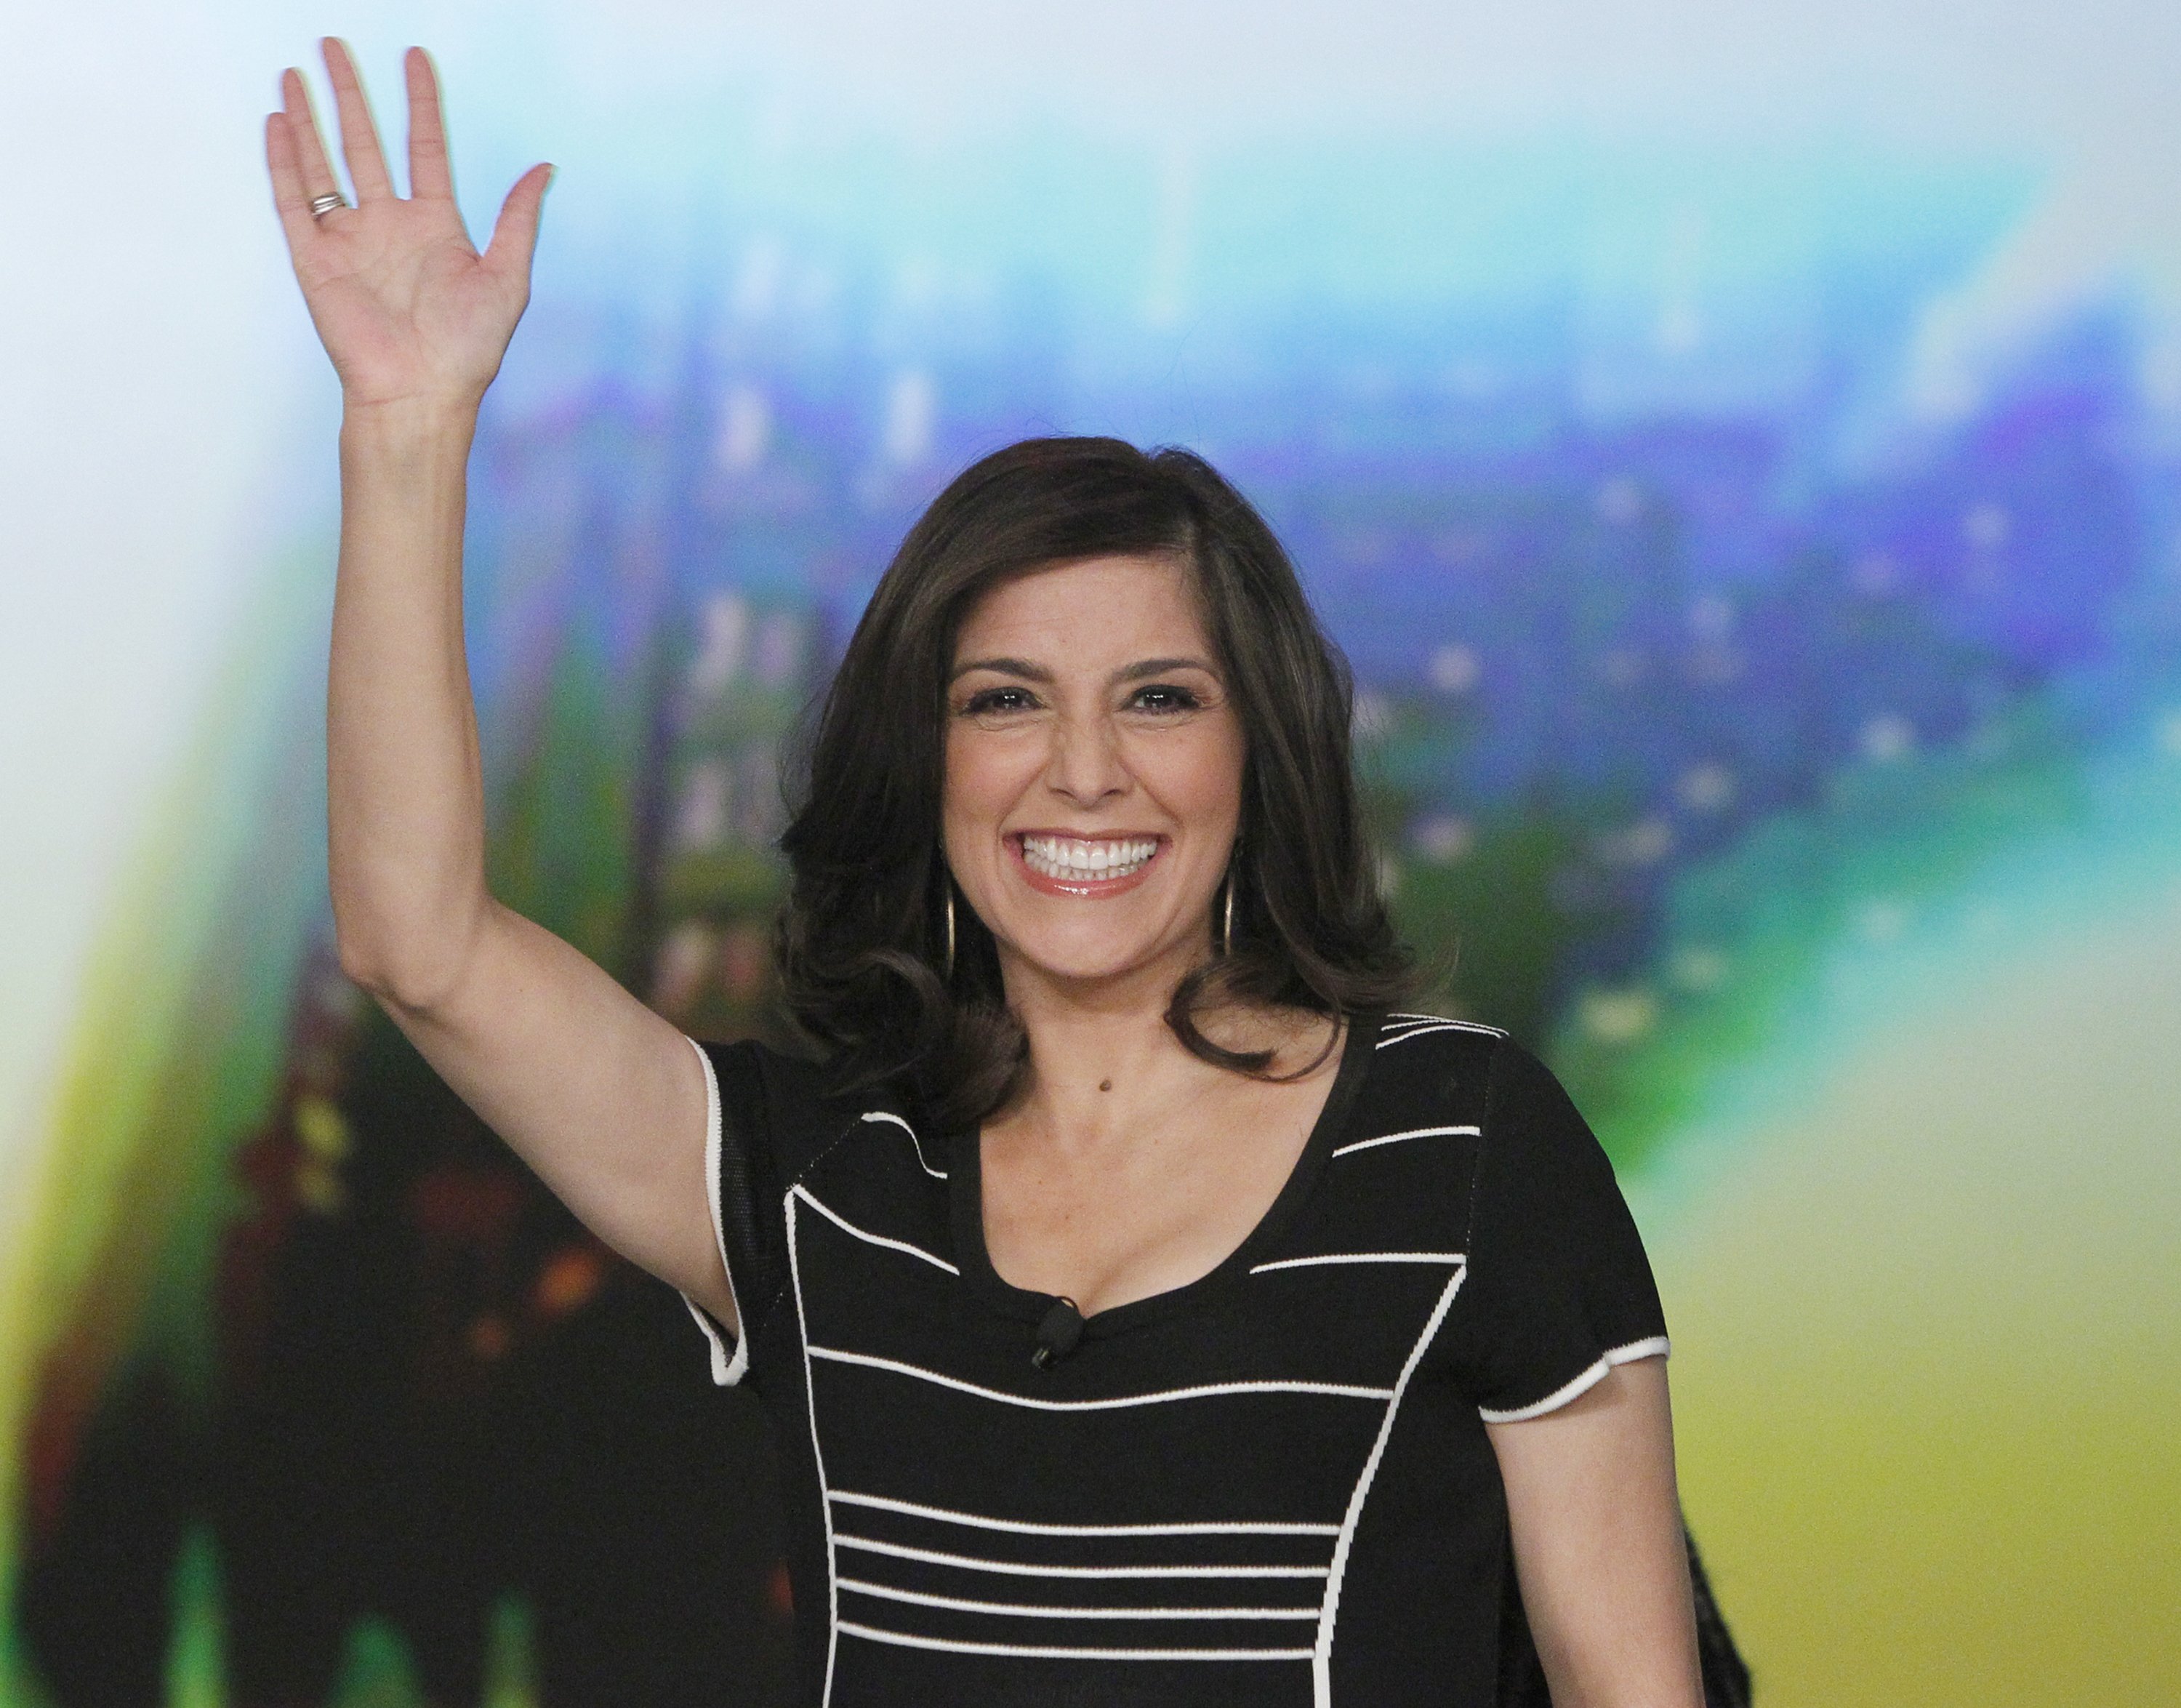 Rachel Campos-Duffy, guest speaker at the Independent Women's Forum|Photo: Getty Images